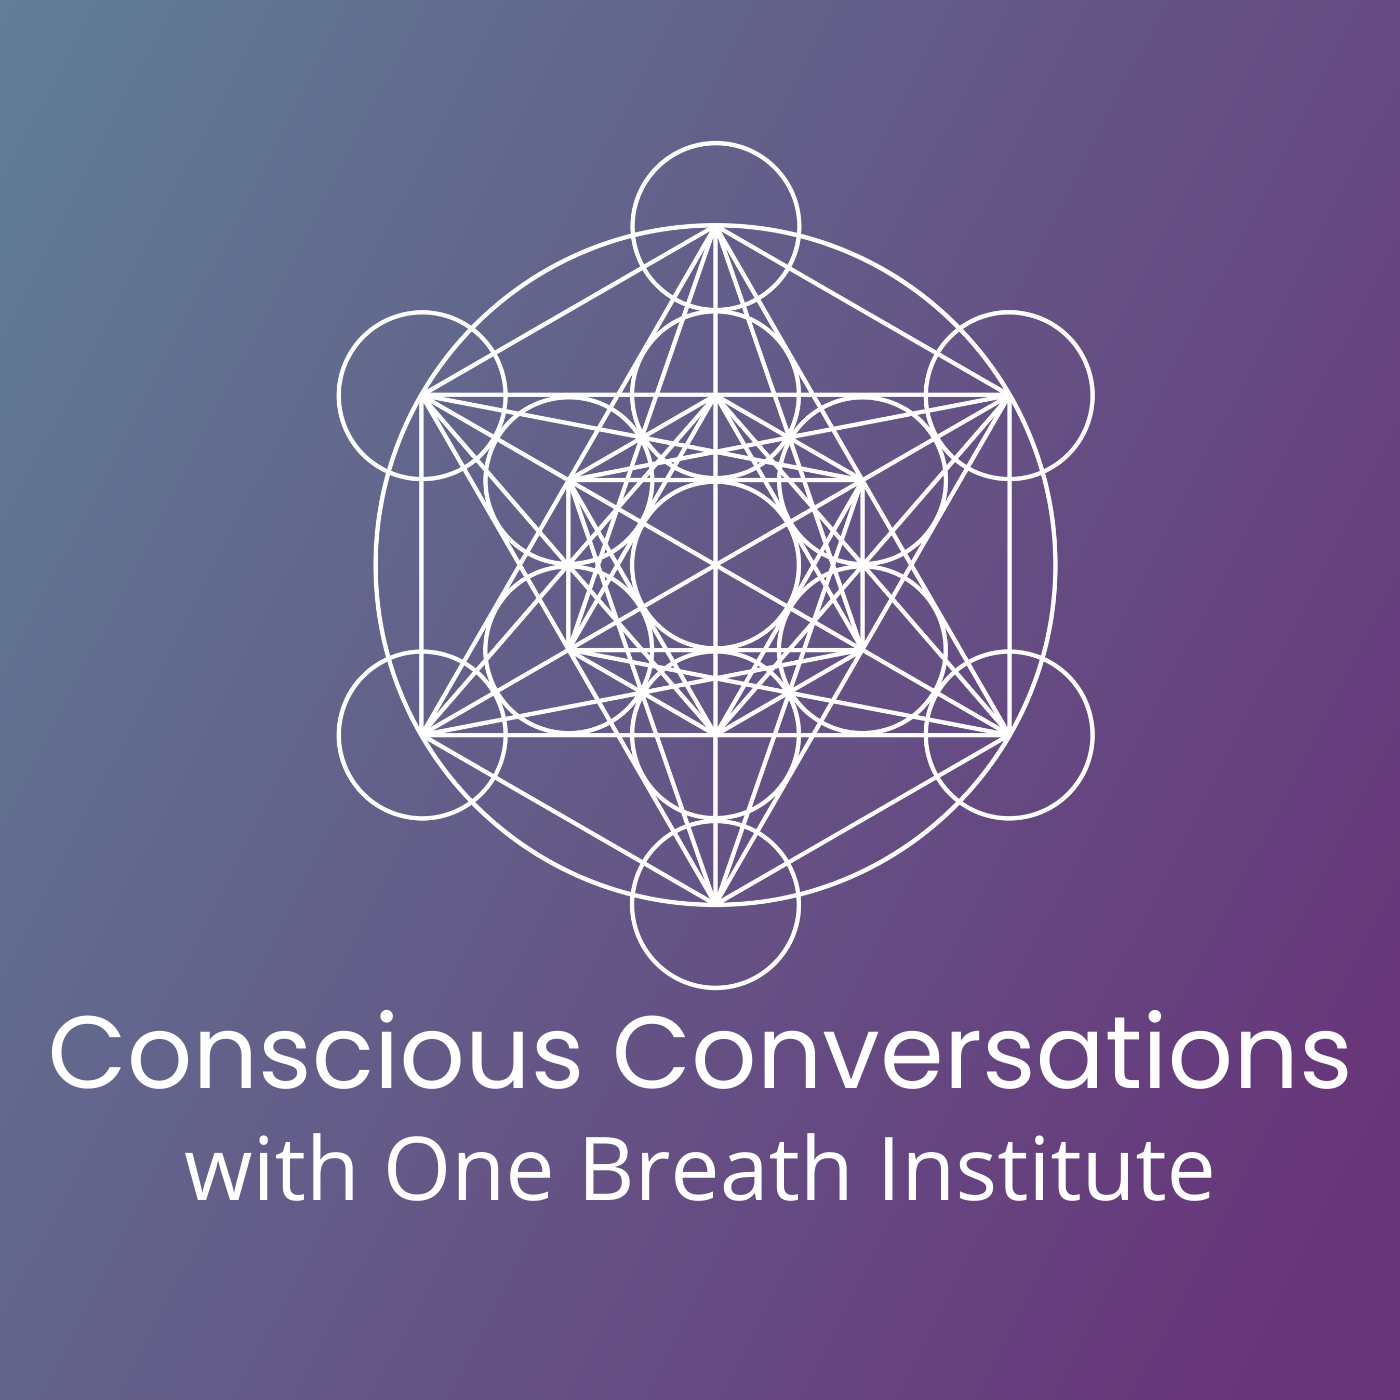 Conscious Conversations with One Breath Institute